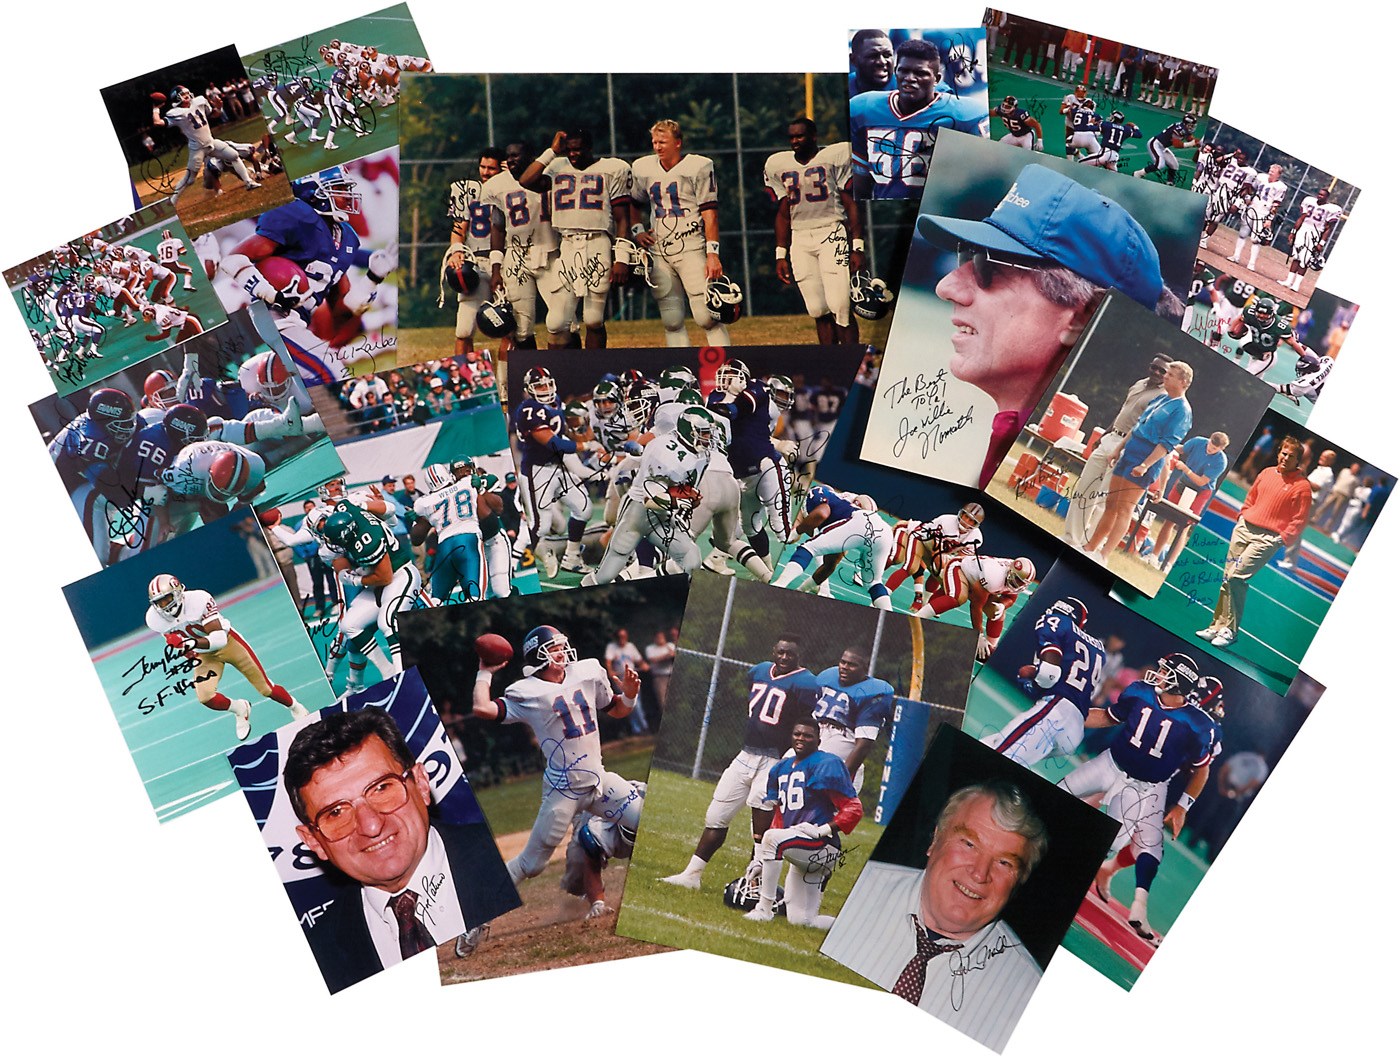 Football - New York Giants Football Signed Photos by Richard Brightly (175+)